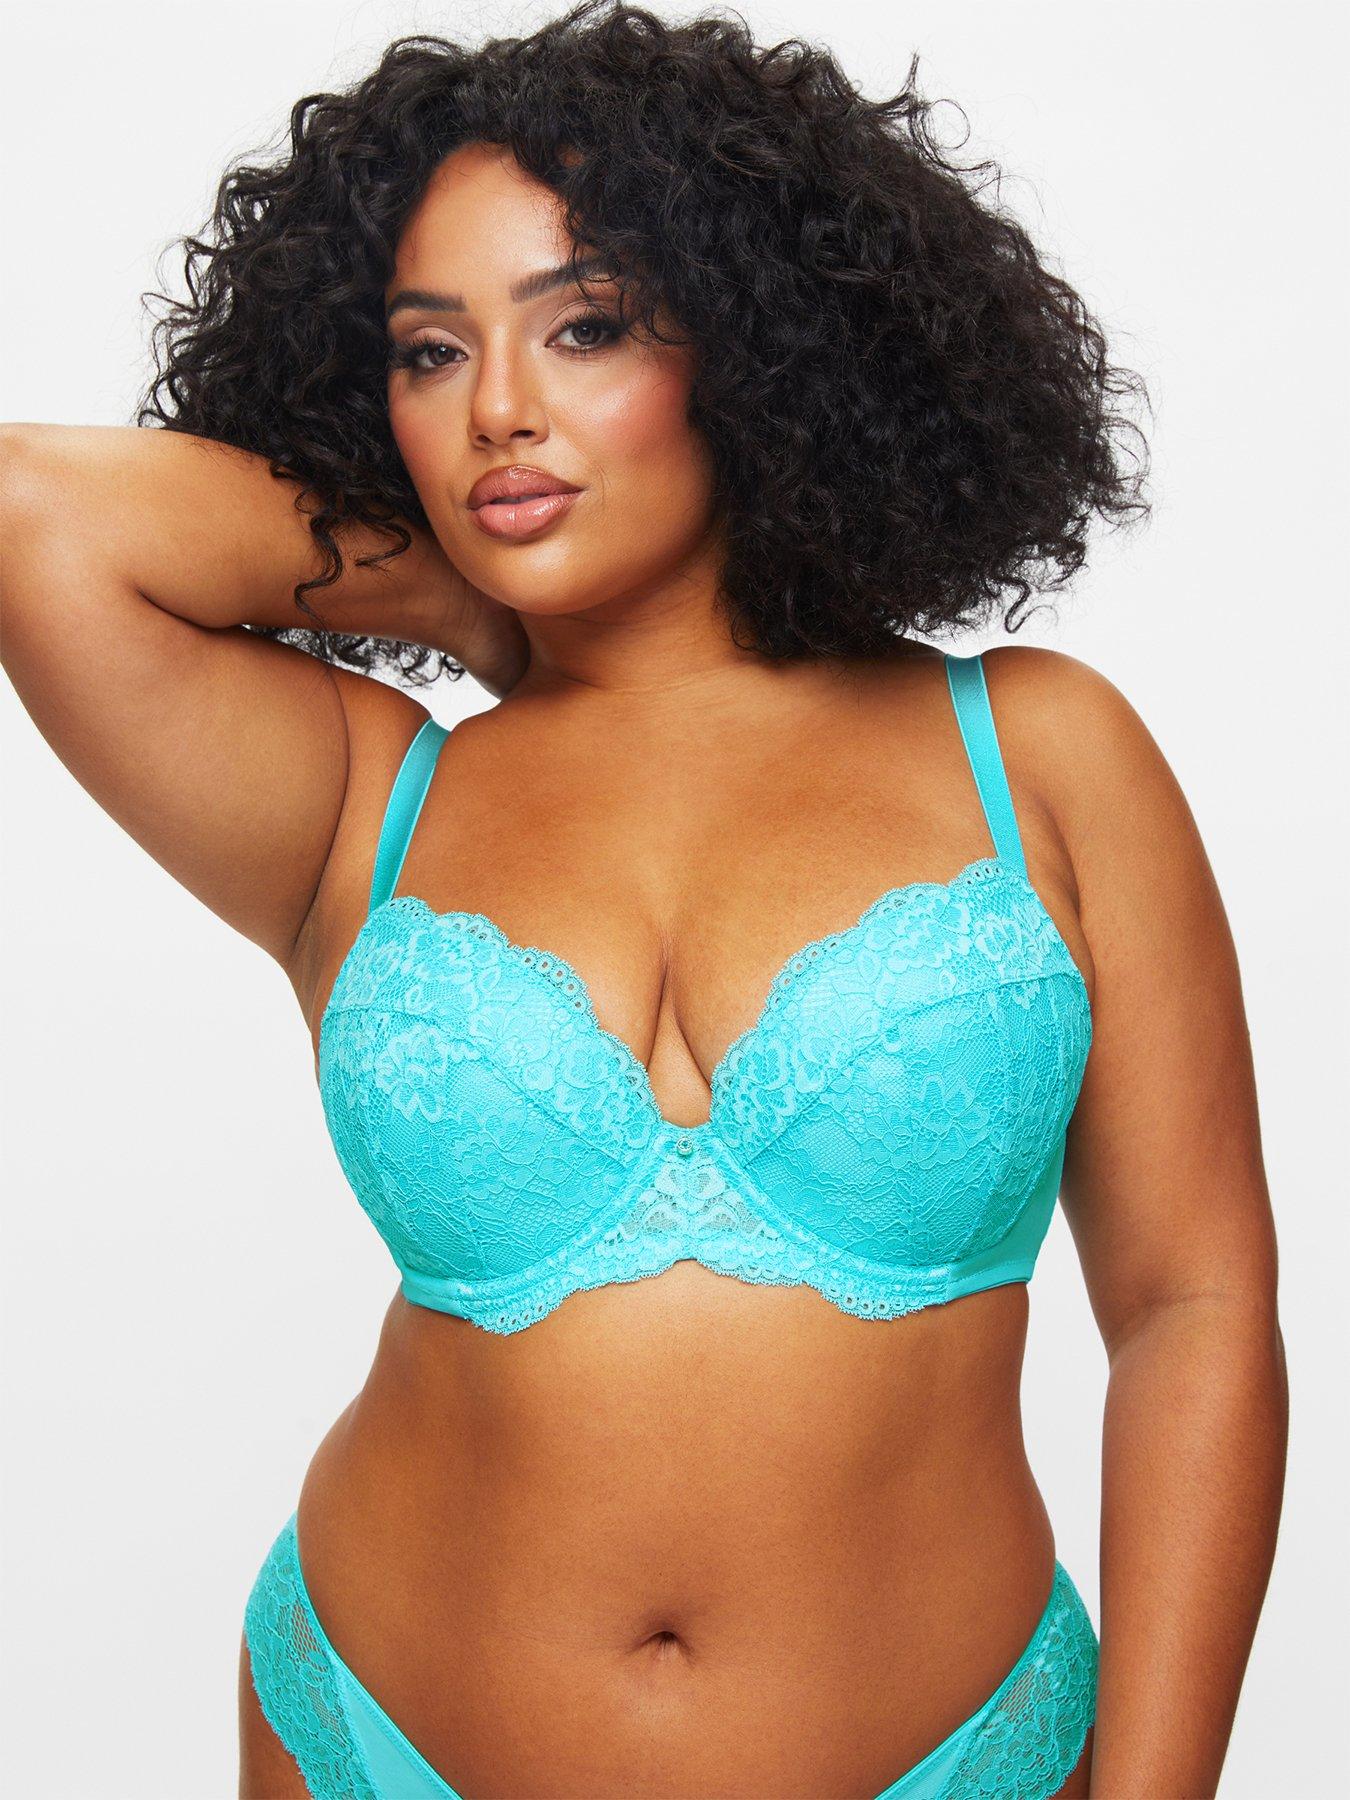 Curvy Kate - Boost Me Up Padded Balcony - CK027106 - The Bra Spa